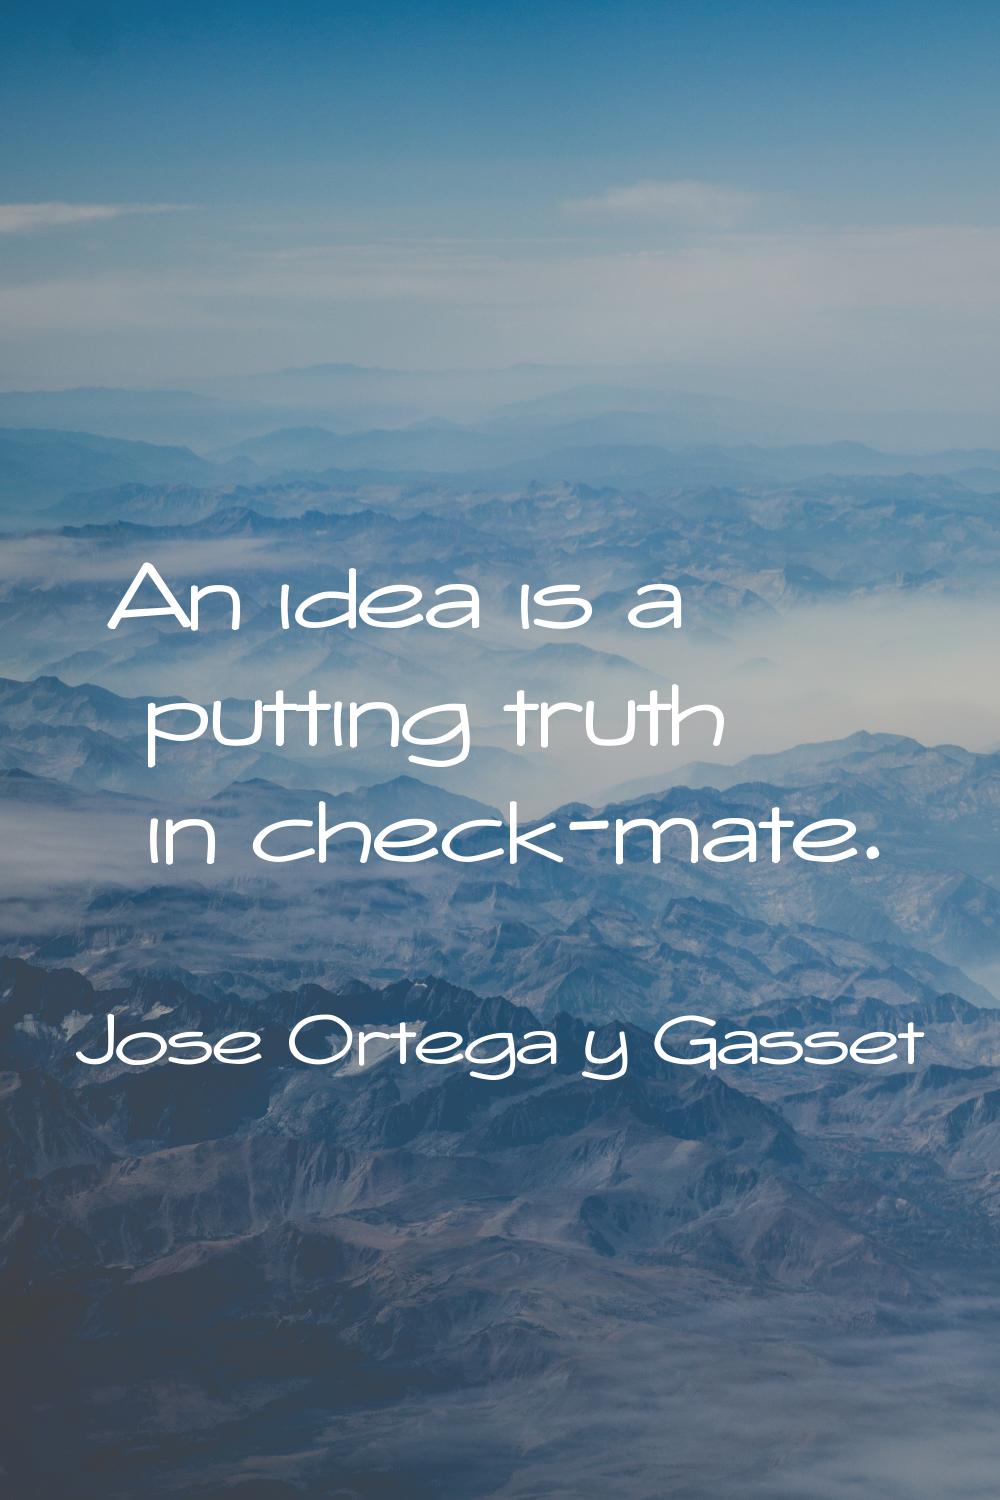 An idea is a putting truth in check-mate.